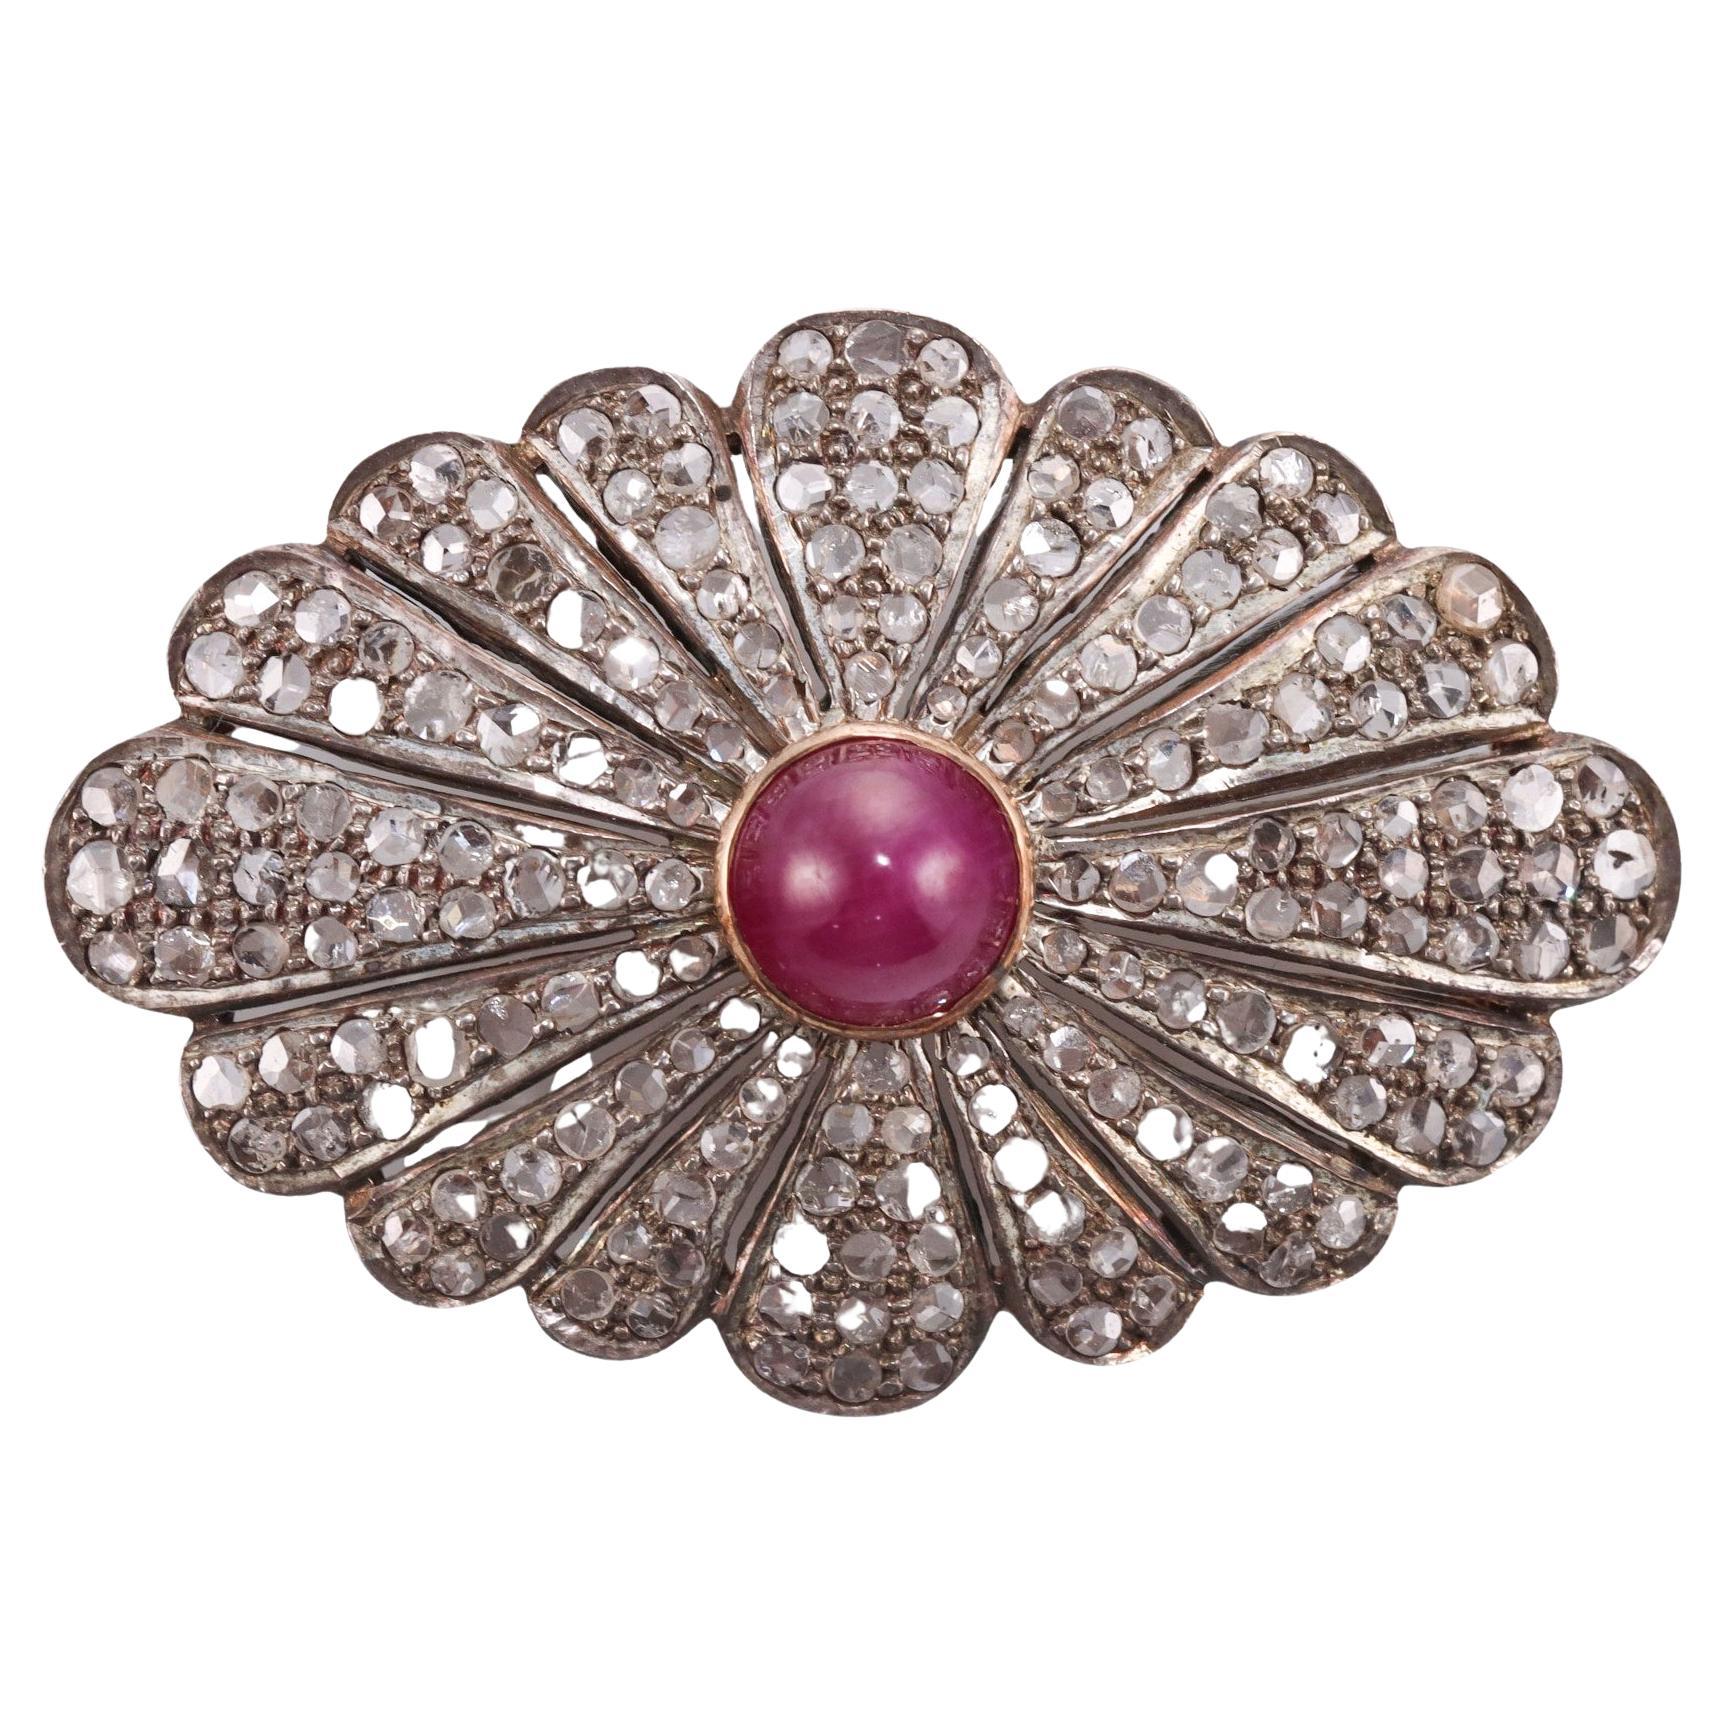 Antique Silver Gold Rose Cut Diamond Ruby Brooch For Sale